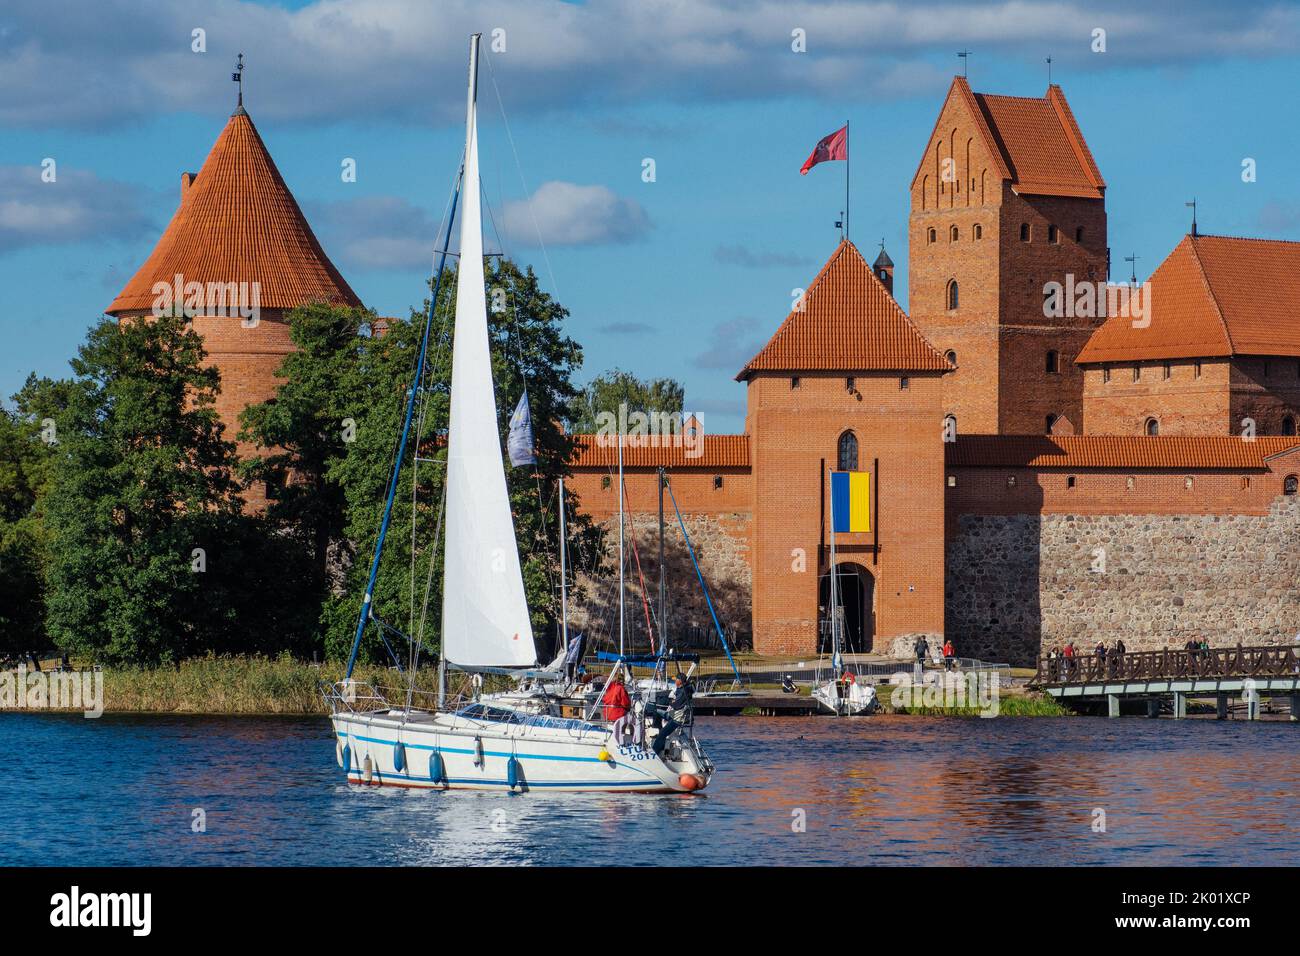 Medieval castle of Trakai, Vilnius, Lithuania, Europe, surrounded by beautiful lakes and nature with wooden bridge, sail boat and Ukrainian flag Stock Photo